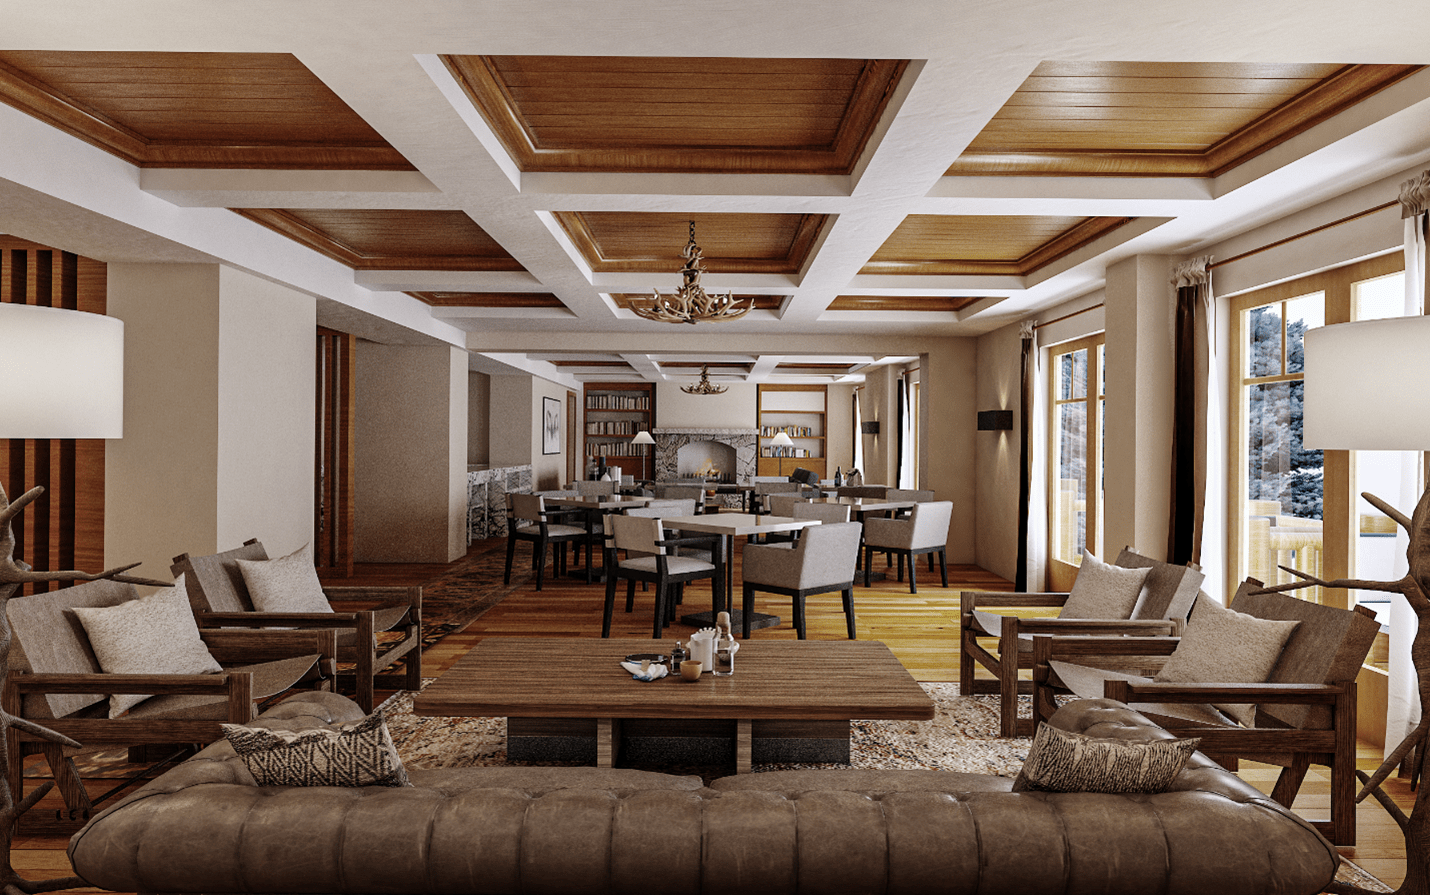 The Ritz-Carlton, Bachelor Gulch Club Lounge. Wood floors and ceiling inserts, a brown couch and wooden chairs make the area feel light and homey.